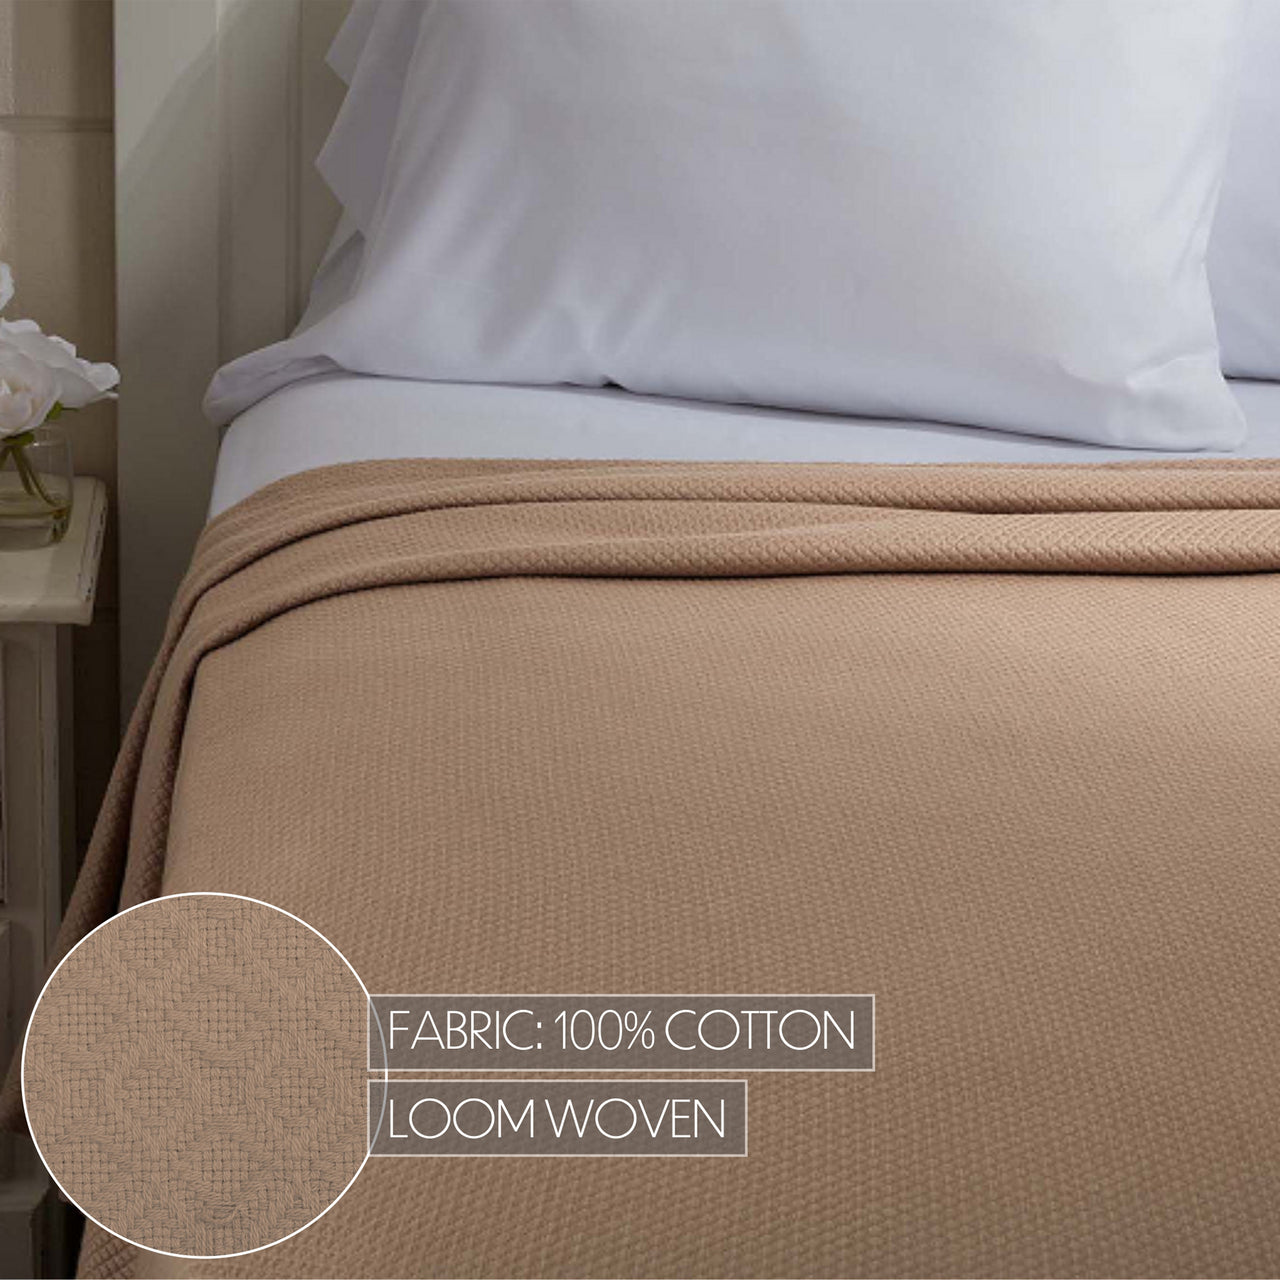 Serenity Tan Cotton Woven Blanket VHC Brands